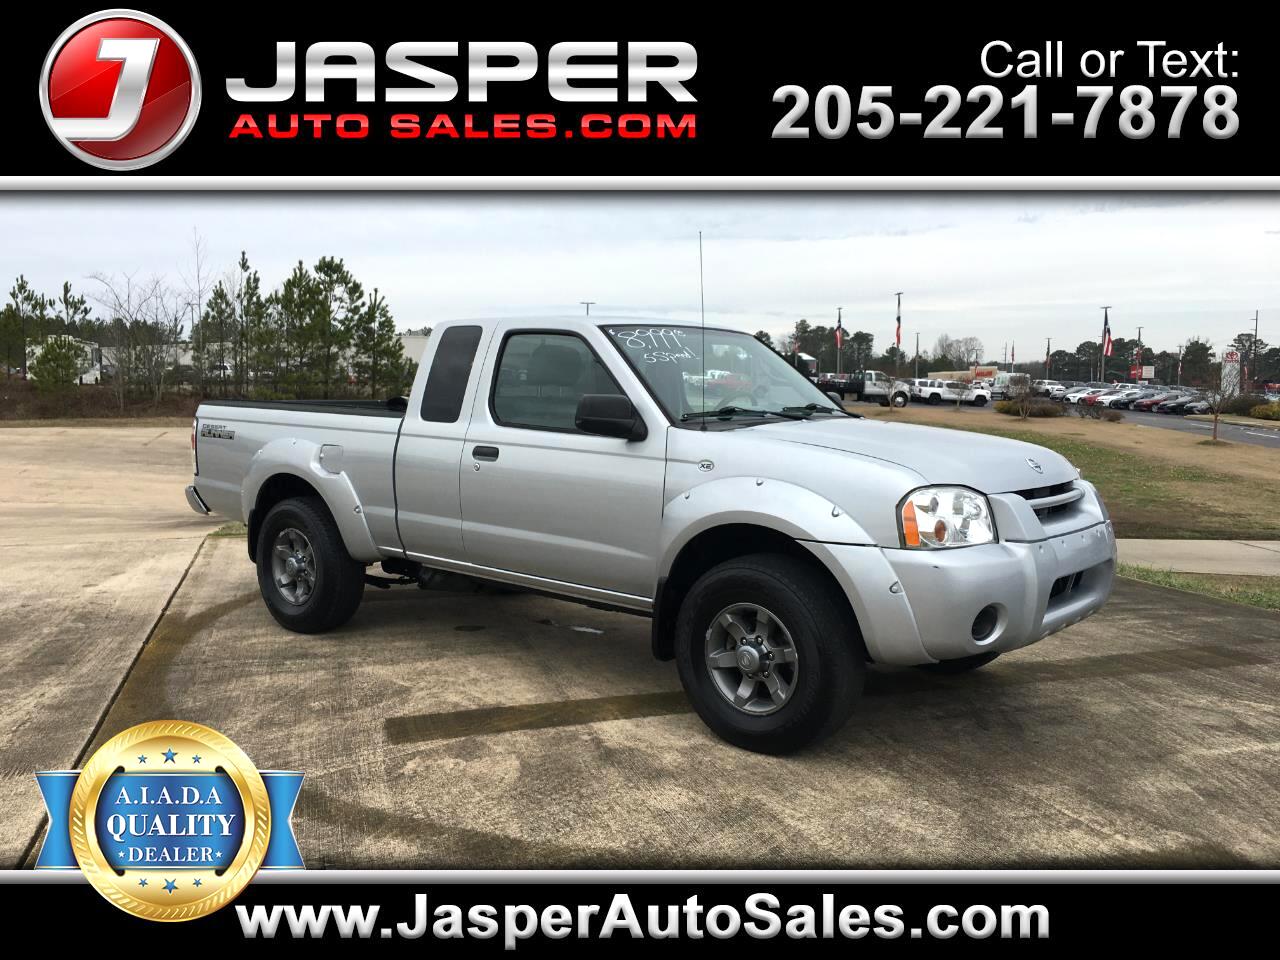 Used 2003 Nissan Frontier 2WD XE King Cab V6 Manual Desert Runner for 2003 Nissan Frontier V6 Towing Capacity